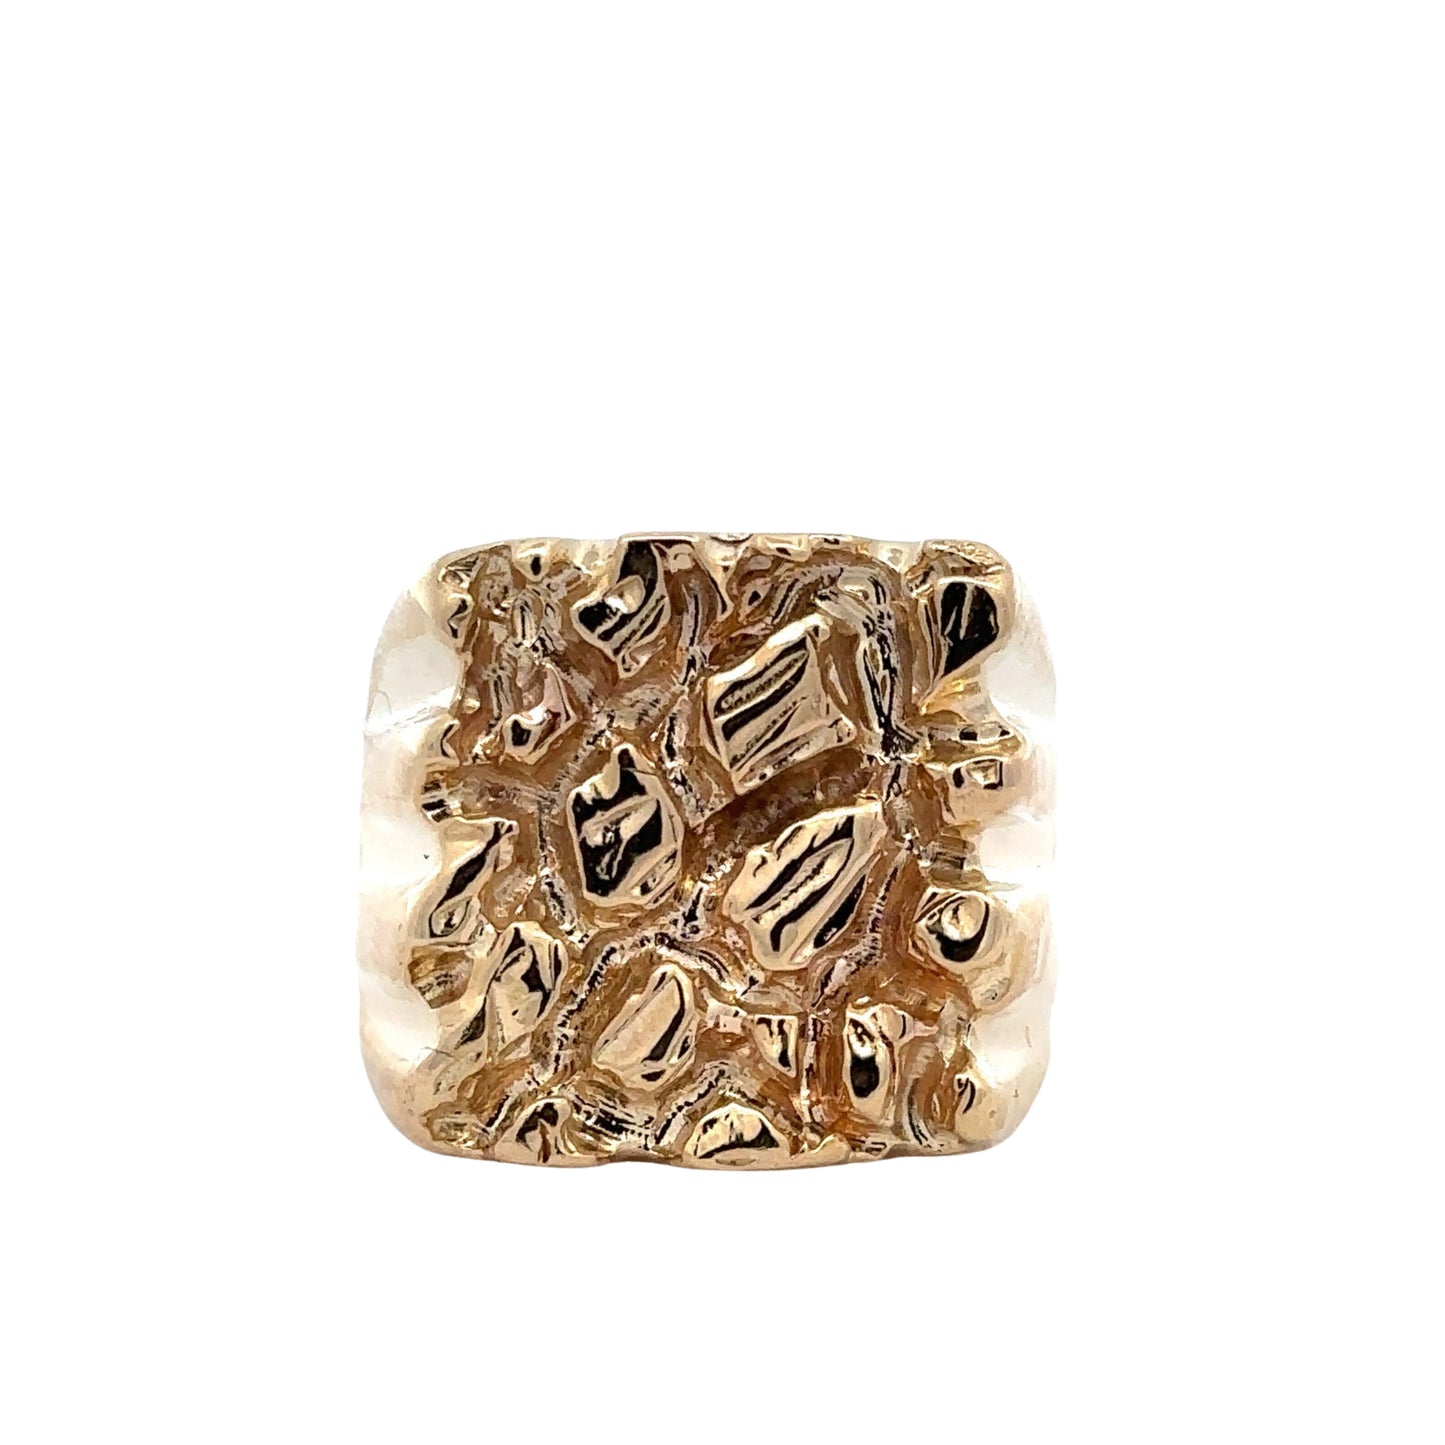 Front of Solid Gold Nugget Ring with Nugget design